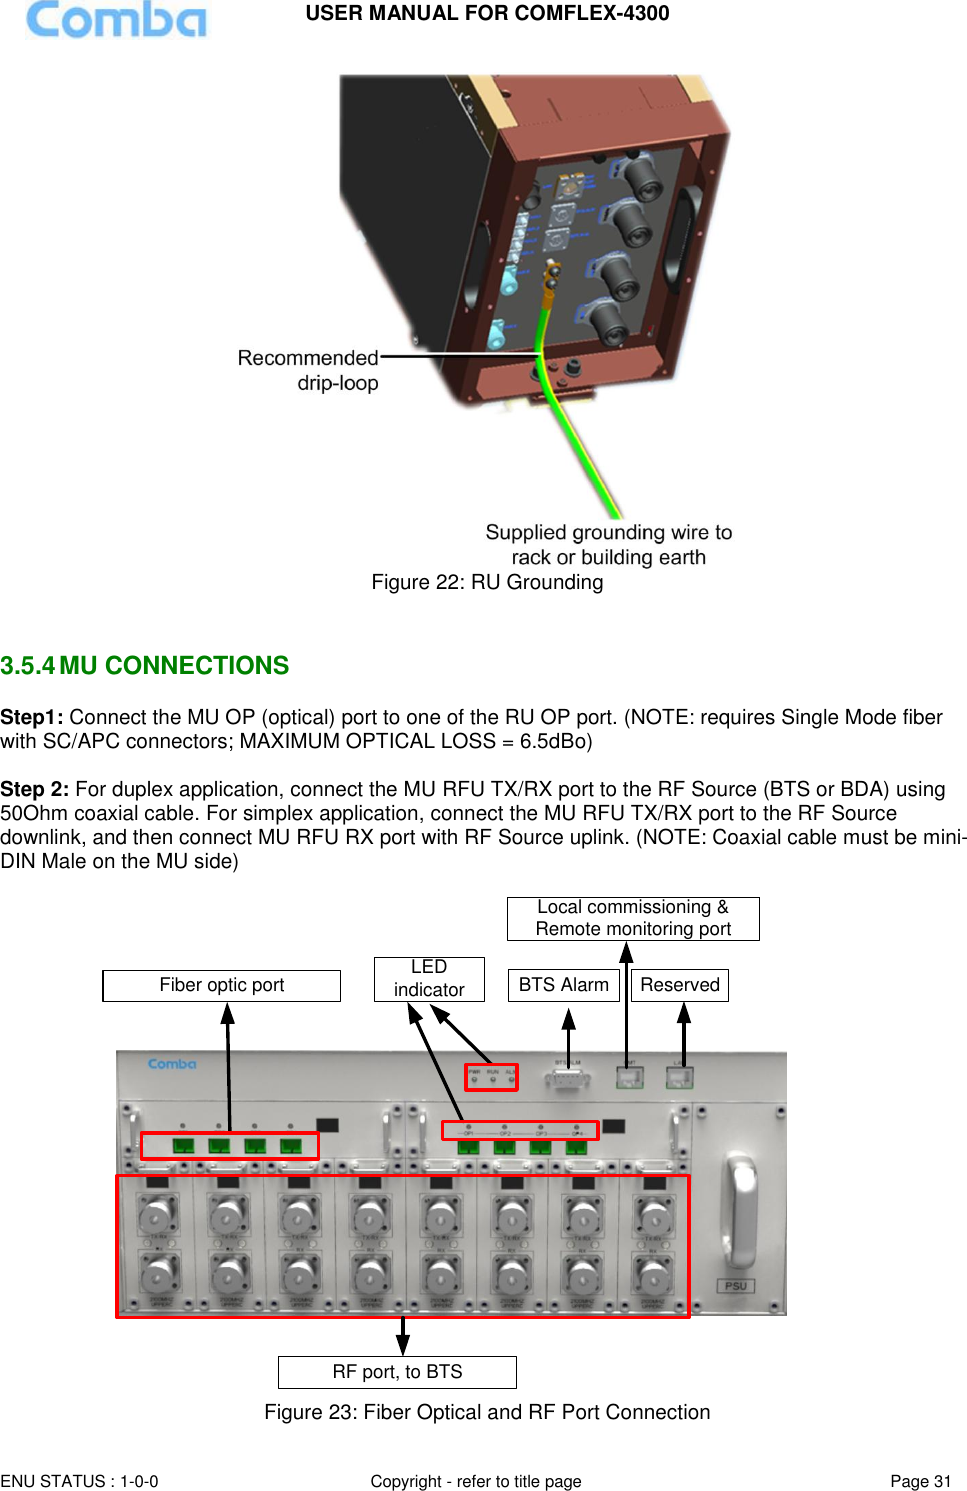 USER MANUAL FOR COMFLEX-4300  ENU STATUS : 1-0-0 Copyright - refer to title page Page 31      Figure 22: RU Grounding   3.5.4 MU CONNECTIONS Step1: Connect the MU OP (optical) port to one of the RU OP port. (NOTE: requires Single Mode fiber with SC/APC connectors; MAXIMUM OPTICAL LOSS = 6.5dBo)  Step 2: For duplex application, connect the MU RFU TX/RX port to the RF Source (BTS or BDA) using 50Ohm coaxial cable. For simplex application, connect the MU RFU TX/RX port to the RF Source downlink, and then connect MU RFU RX port with RF Source uplink. (NOTE: Coaxial cable must be mini-DIN Male on the MU side)   Local commissioning &amp; Remote monitoring portBTS Alarm ReservedFiber optic portRF port, to BTSLED indicator  Figure 23: Fiber Optical and RF Port Connection 